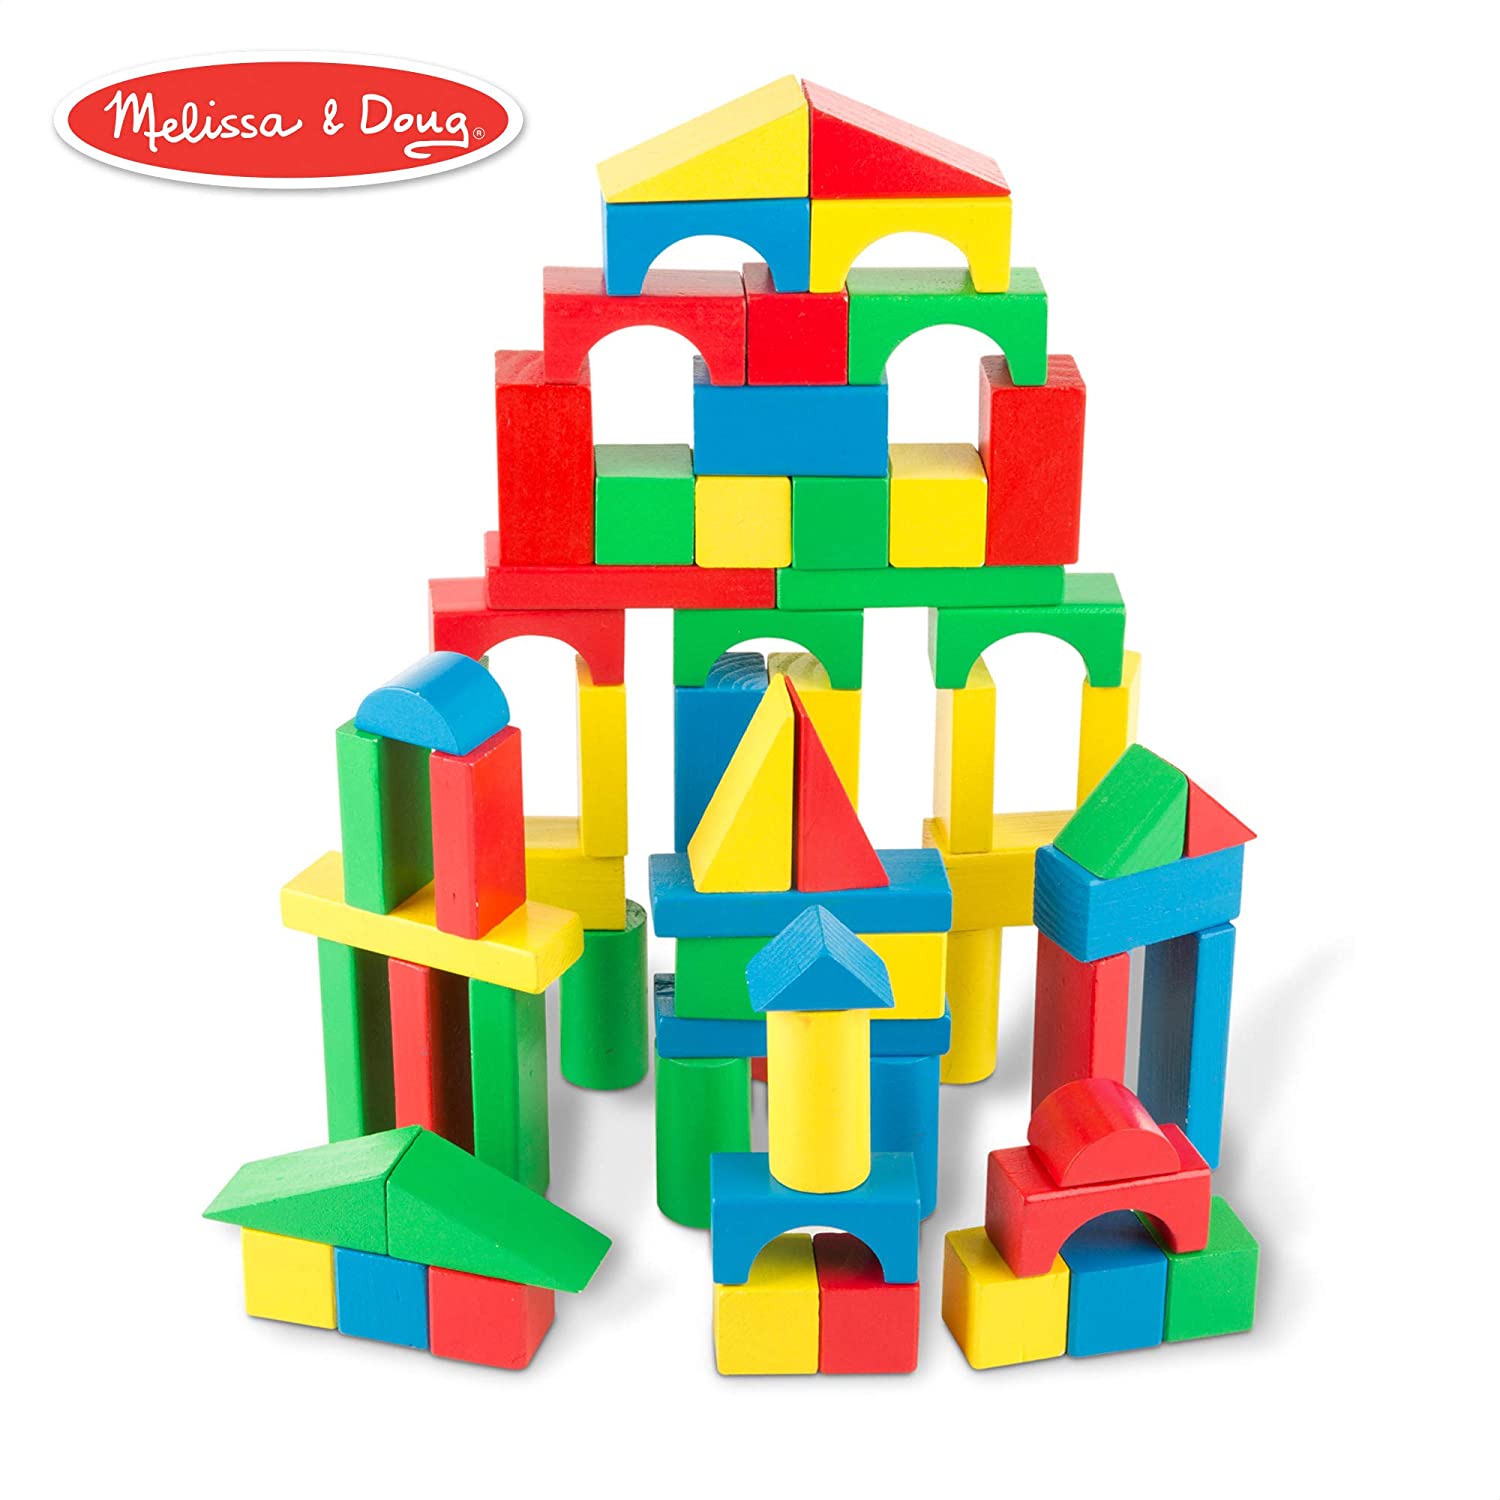 7 Best Baby Blocks 2022 - Buying Guide & Reviews 2